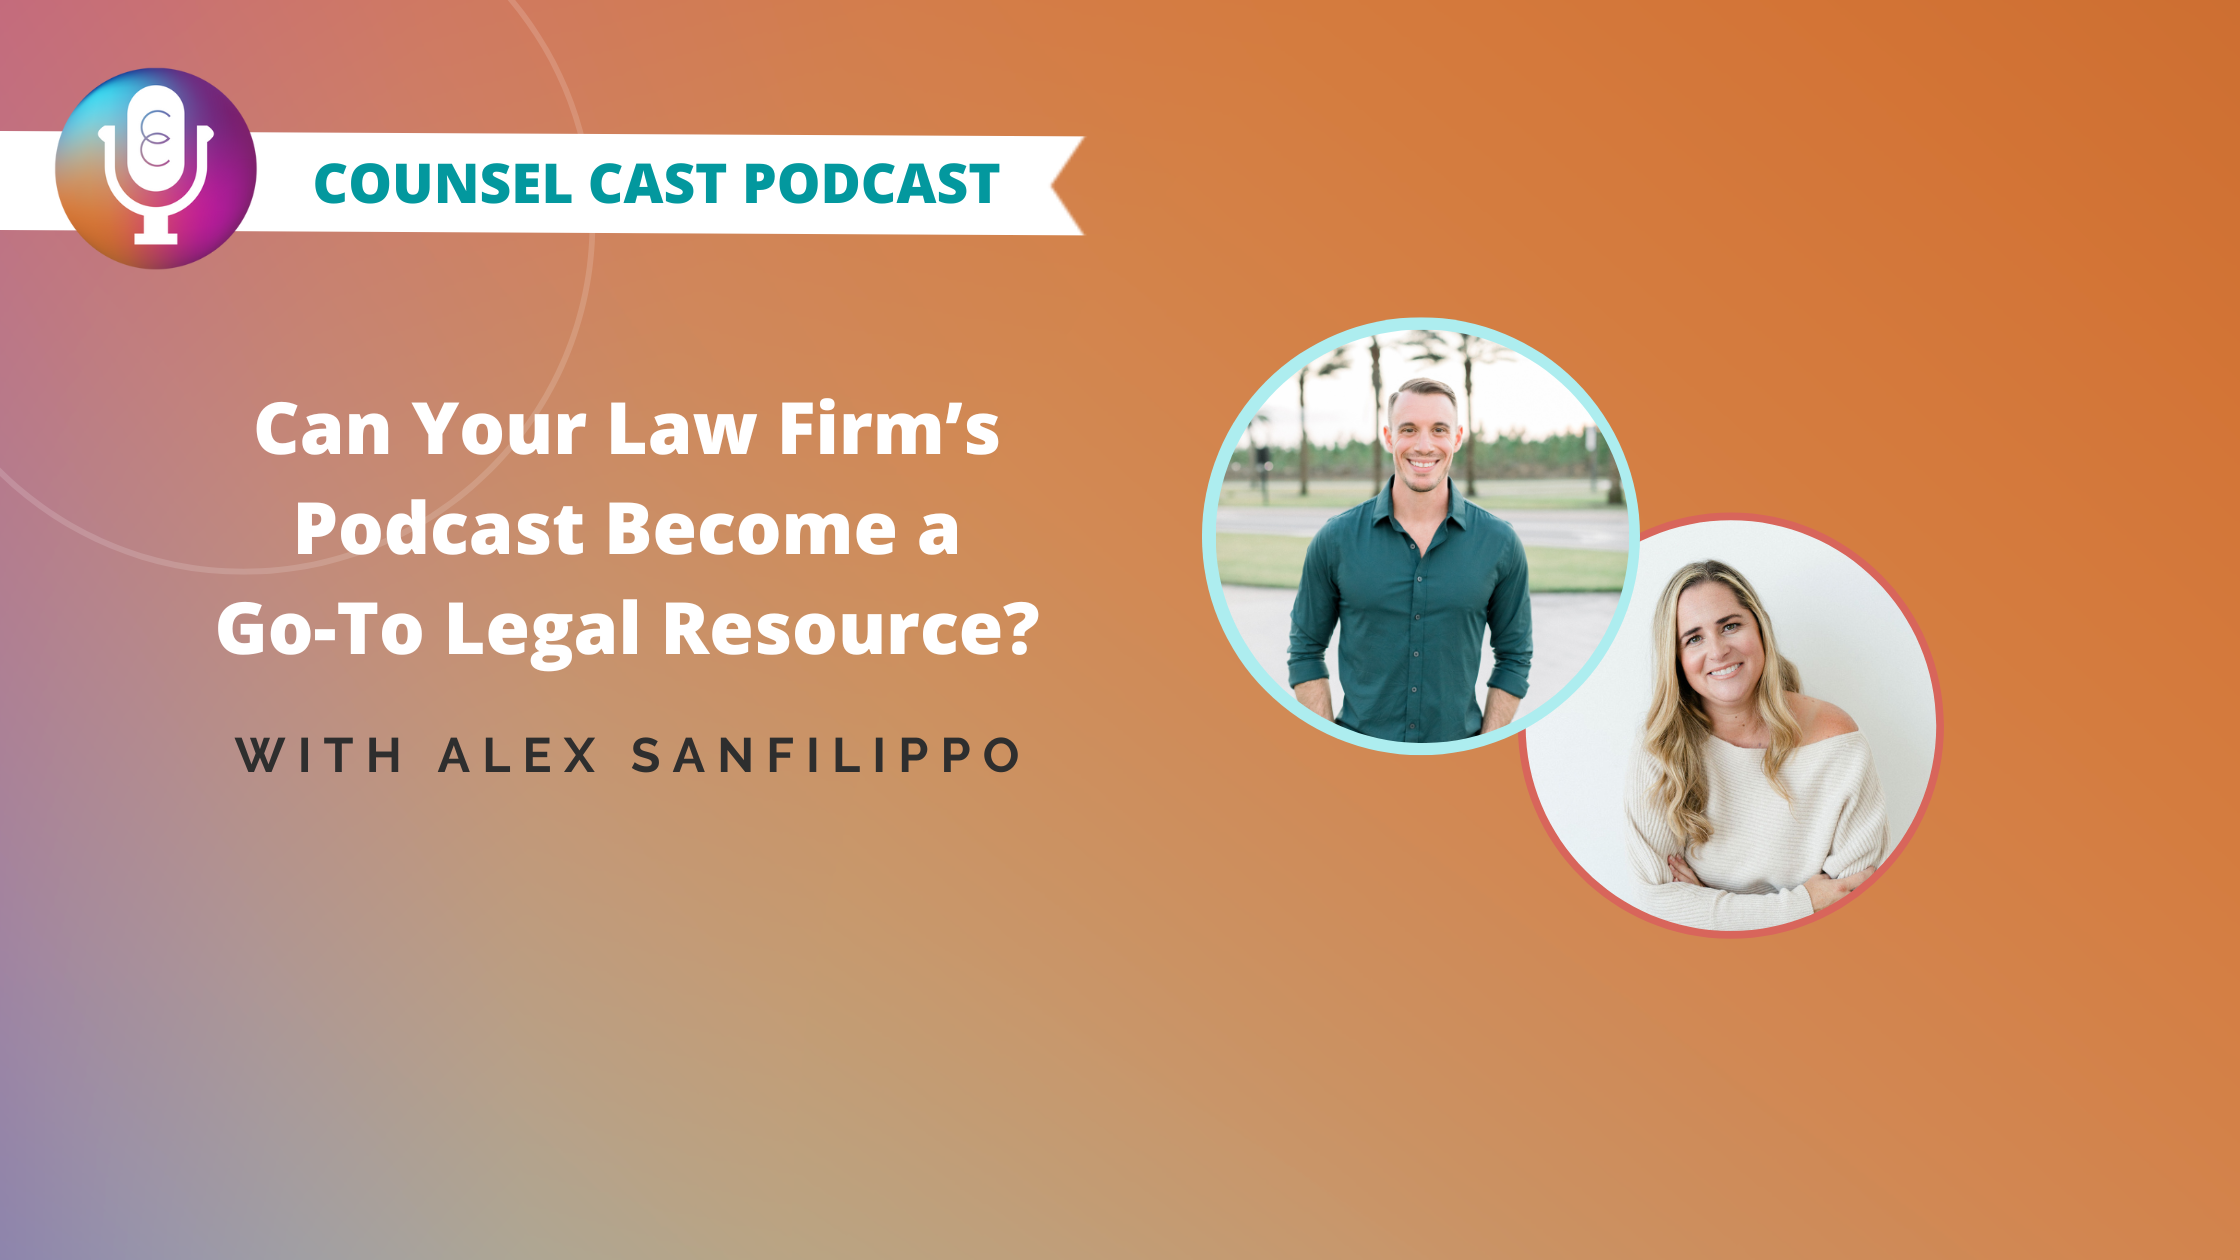 Can Your Law Firm’s Podcast Become a Go-To Legal Resource? With Alex Sanfilippo